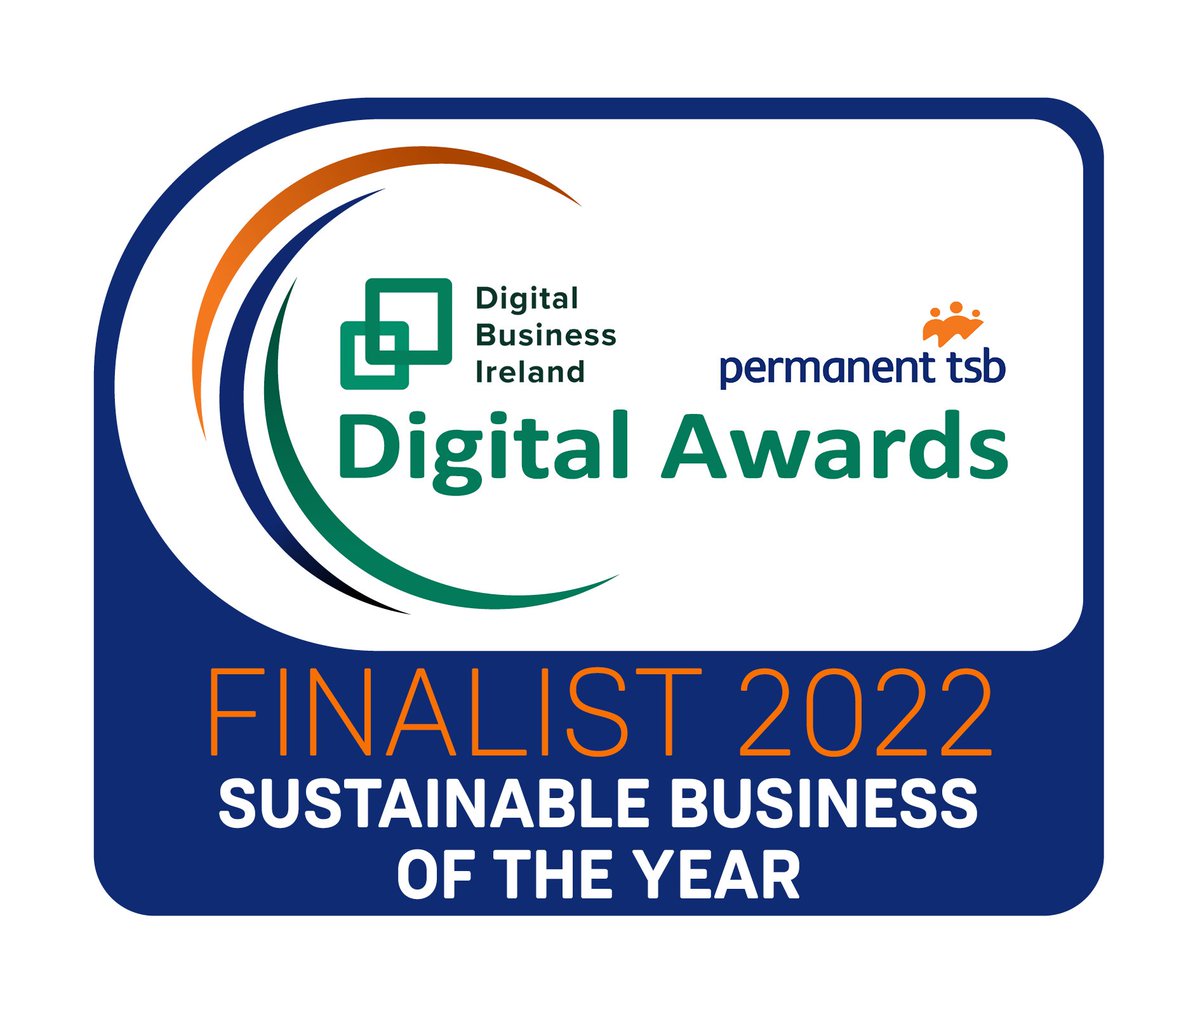 We are delighted to be a finalist in the Sustainable Business of the Year category at the National Digital Business Awards 2022. Best of luck to our fellow finalists! Thank you to @DigitalIre, event sponsor @permanenttsb and award sponsor @SBCIreland. #finalist #digitalawards